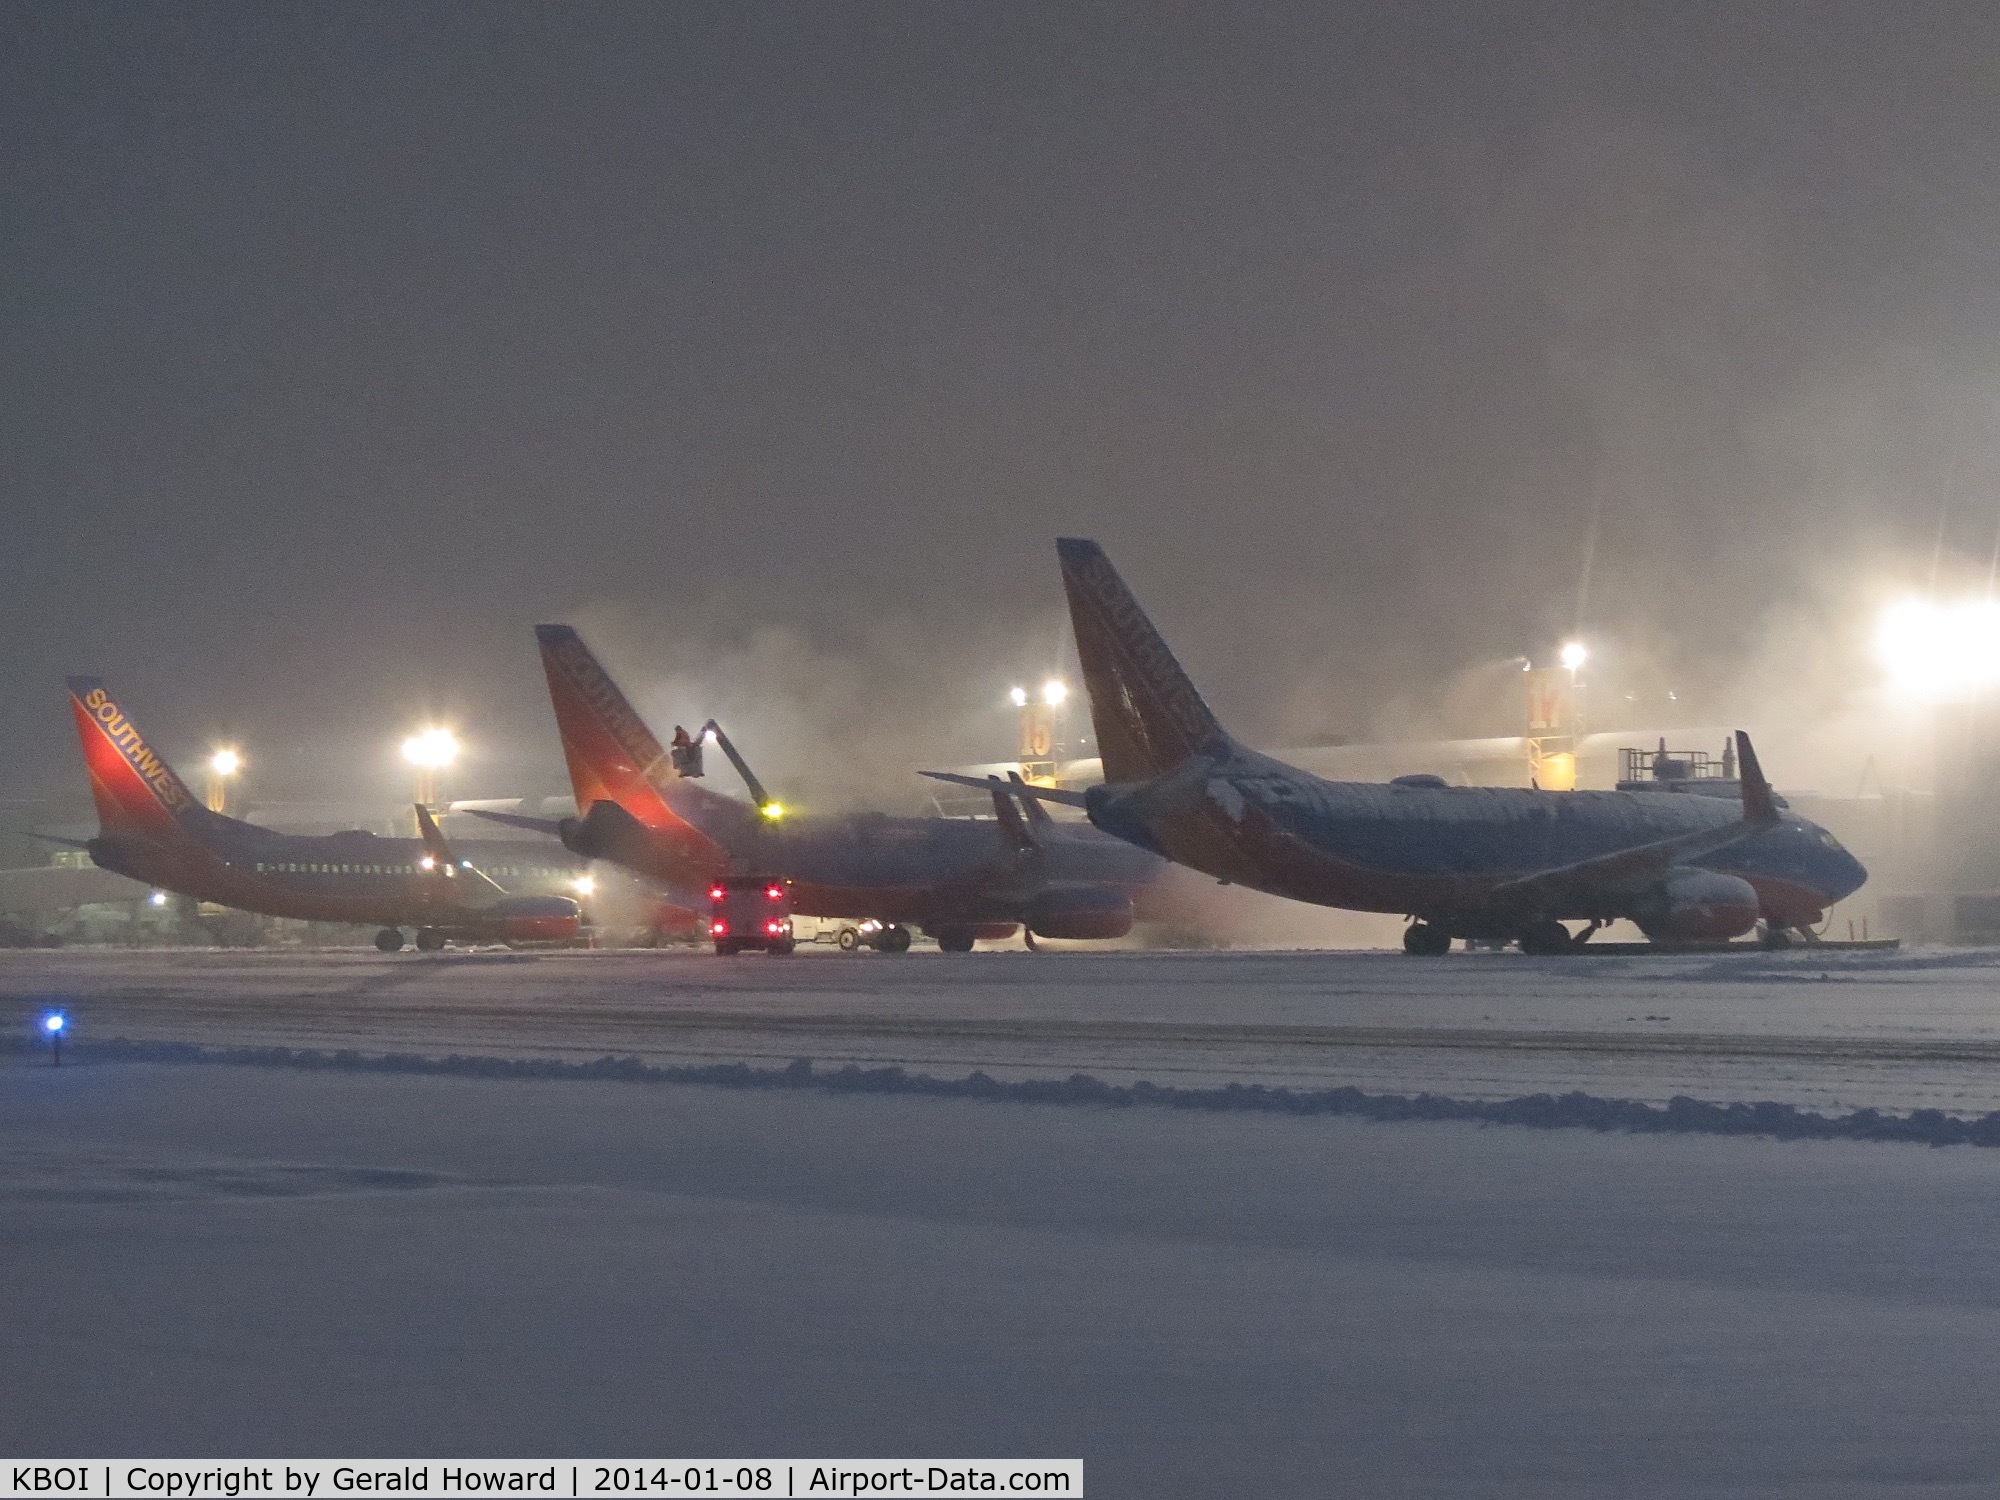 Boise Air Terminal/gowen Fld Airport (BOI) - 3 Southwest jets getting an early morning de ice.